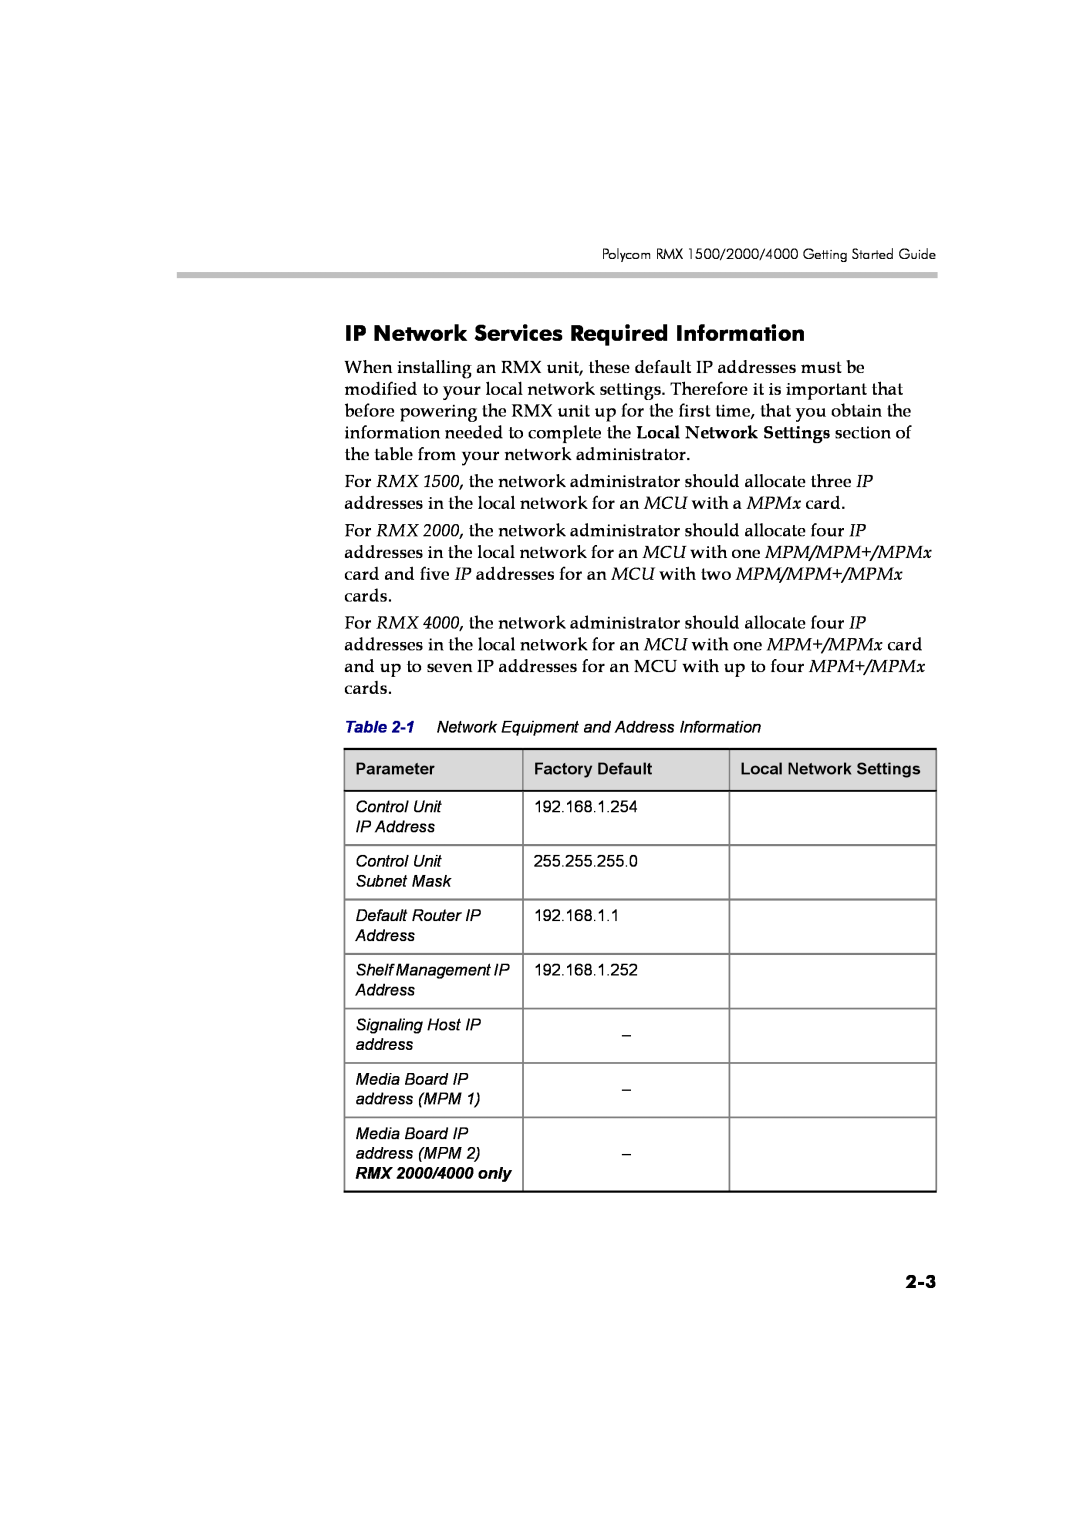 Polycom DOC2560B manual IP Network Services Required Information, Parameter, Factory Default, Local Network Settings 